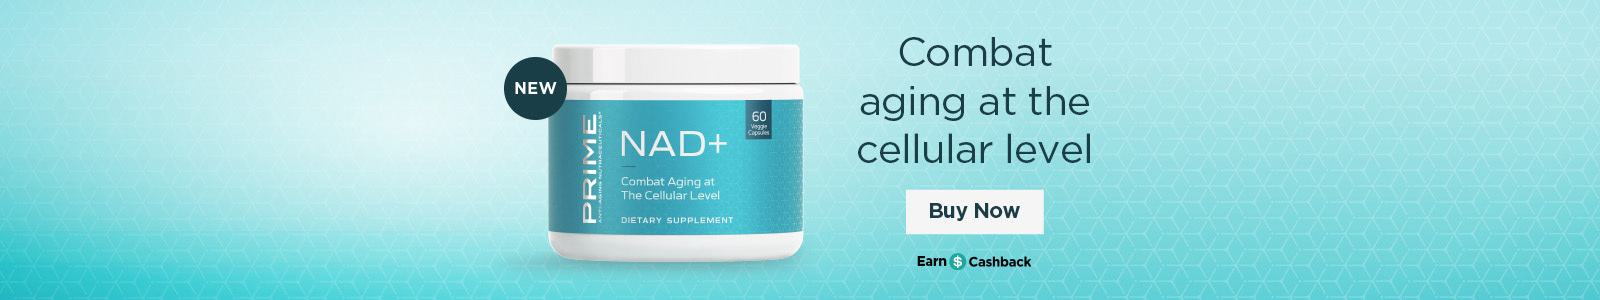 NEW Combat Aging at The Cellular Level Buy Now Act Fast & Shop Now